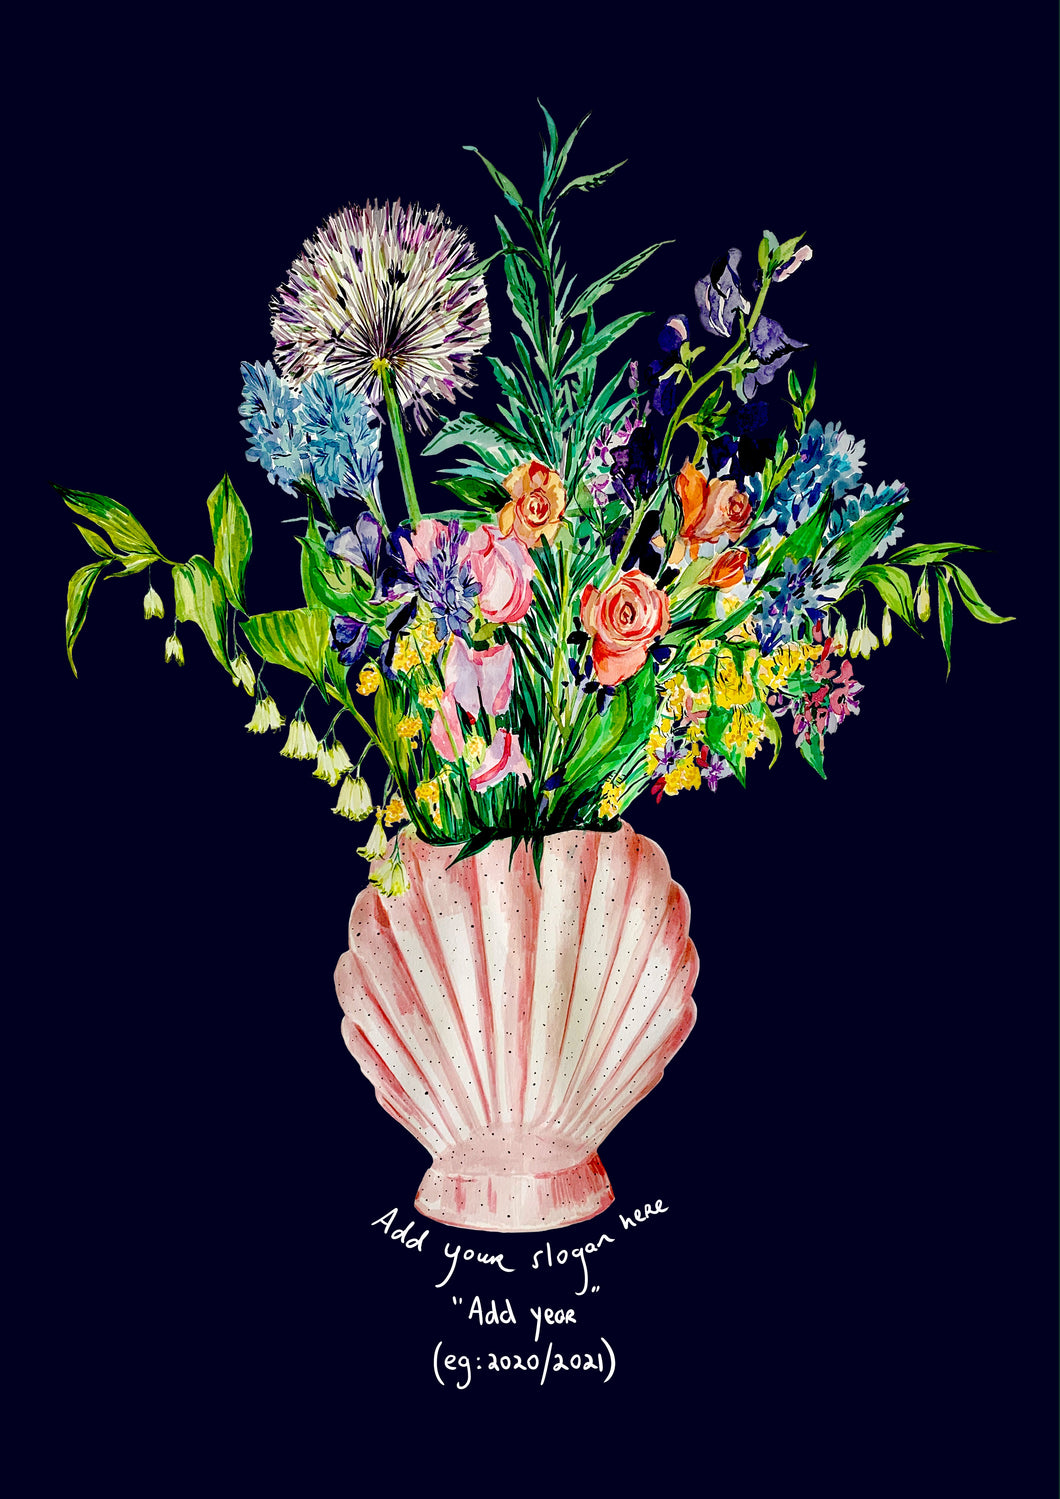 PERSONALISED Shell Vase Of Garden Blooms Winter Edition Giclée Print